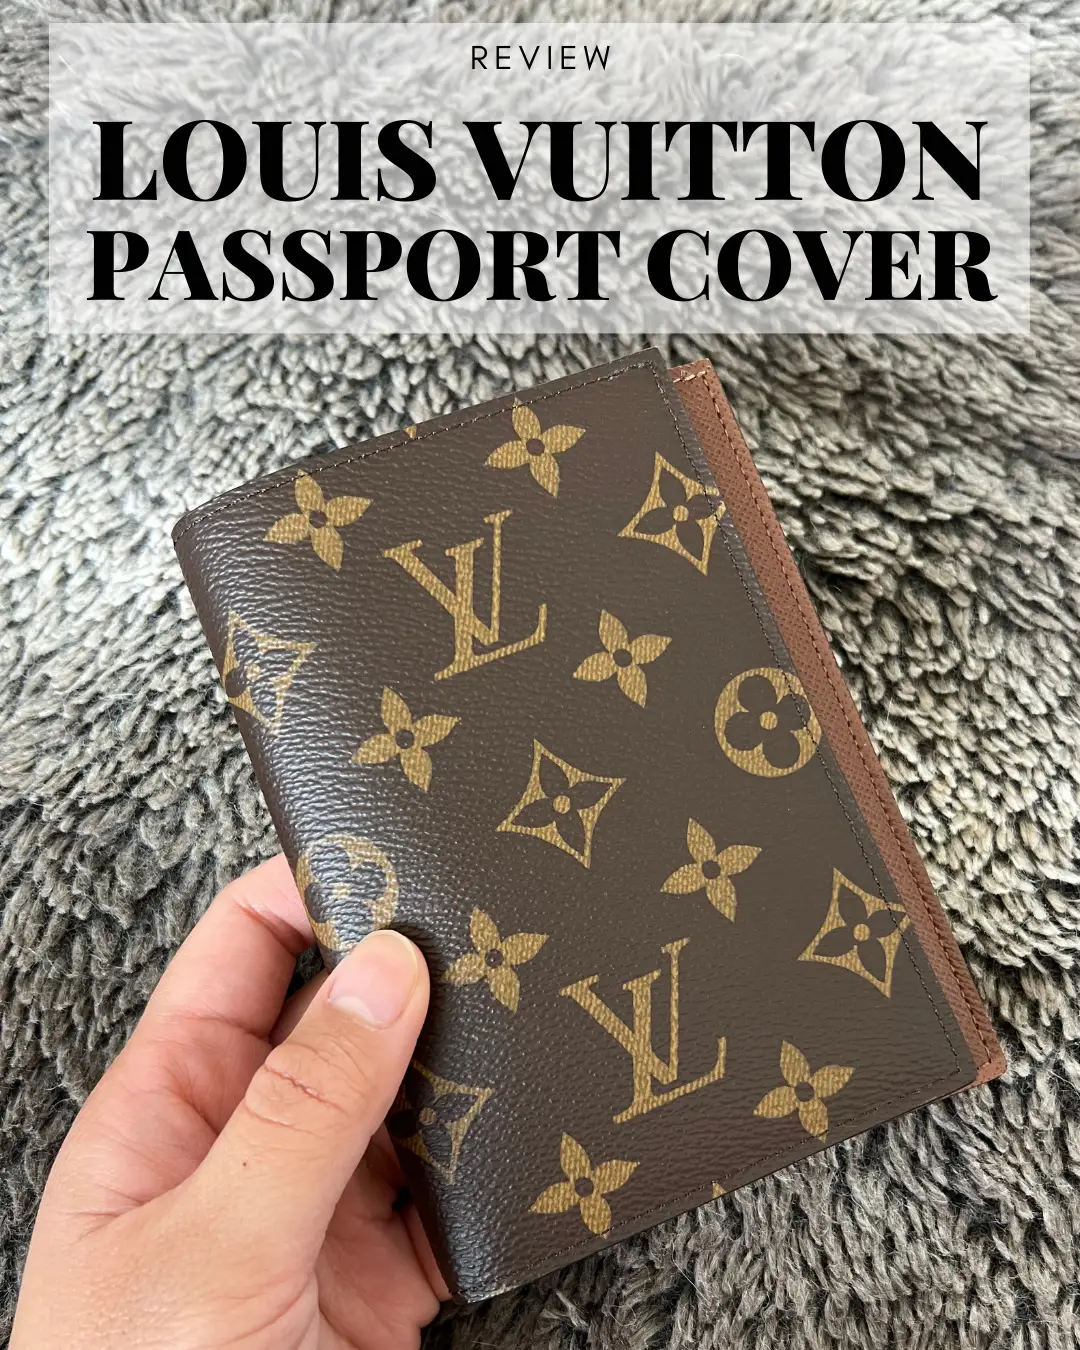 LV Pochette Accessoires Bag *worth the hype?*, Gallery posted by h00lie_